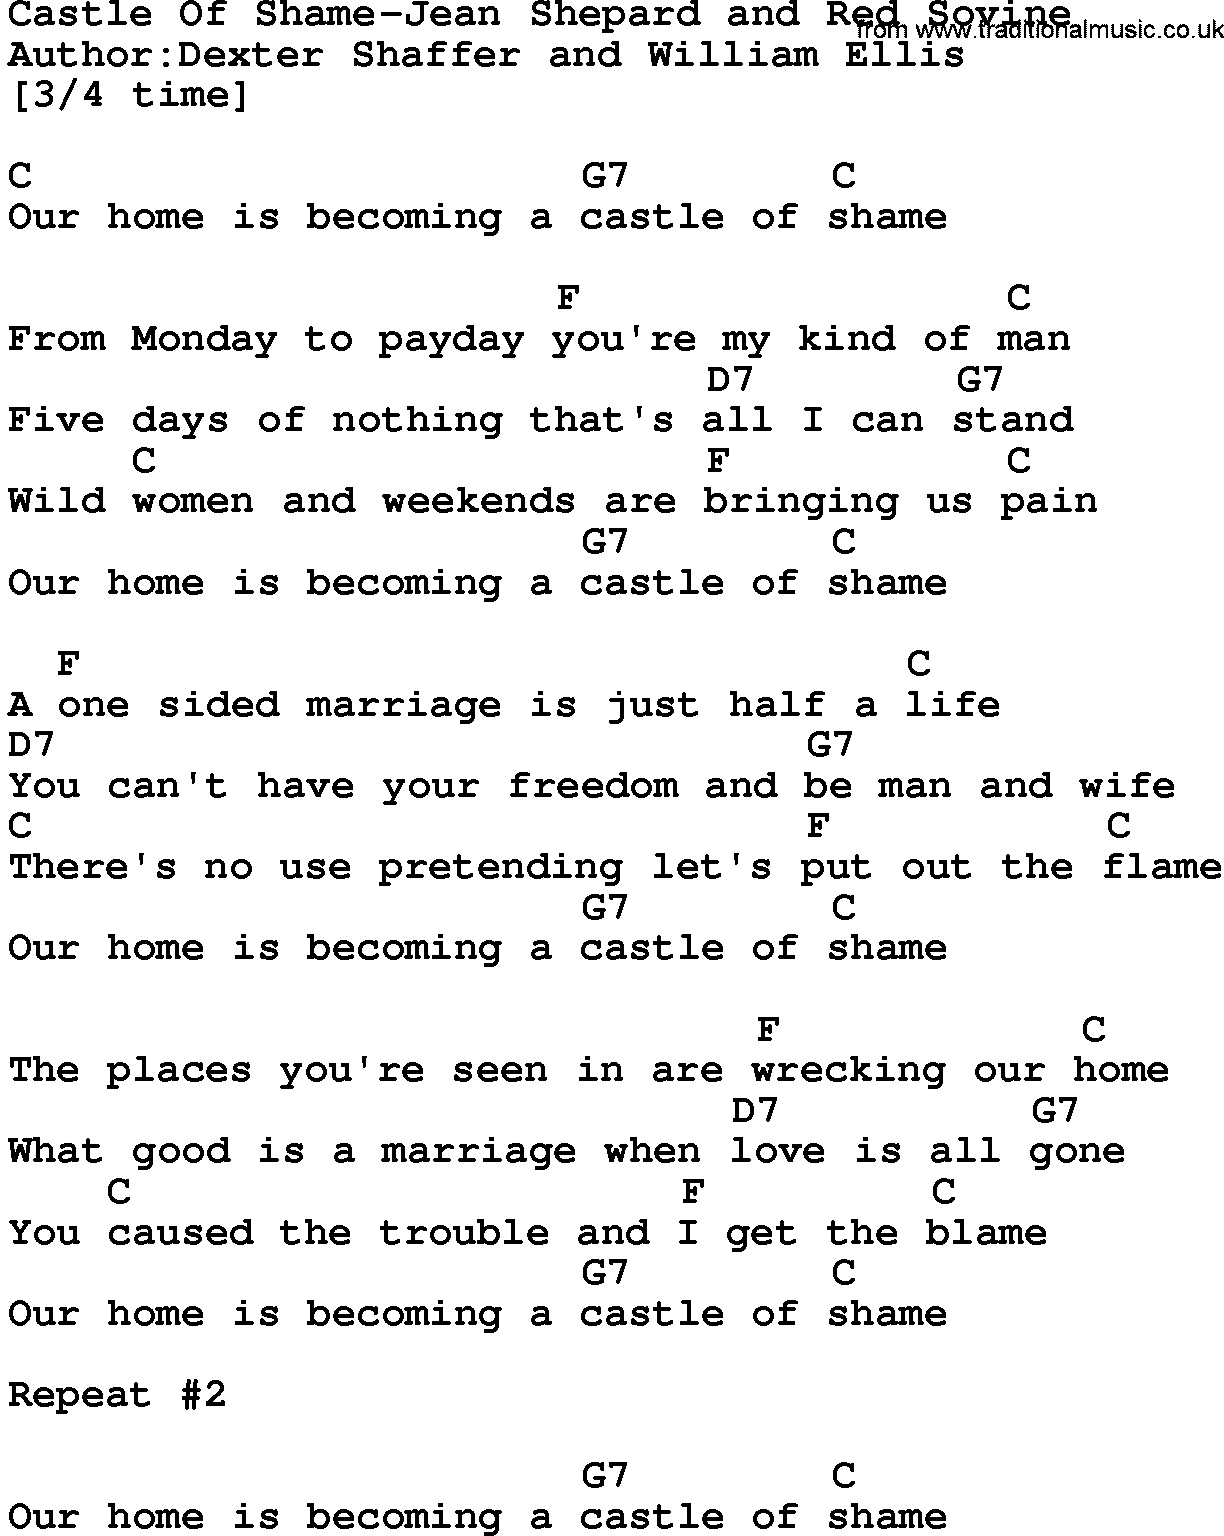 Country music song: Castle Of Shame-Jean Shepard And Red Sovine lyrics and chords